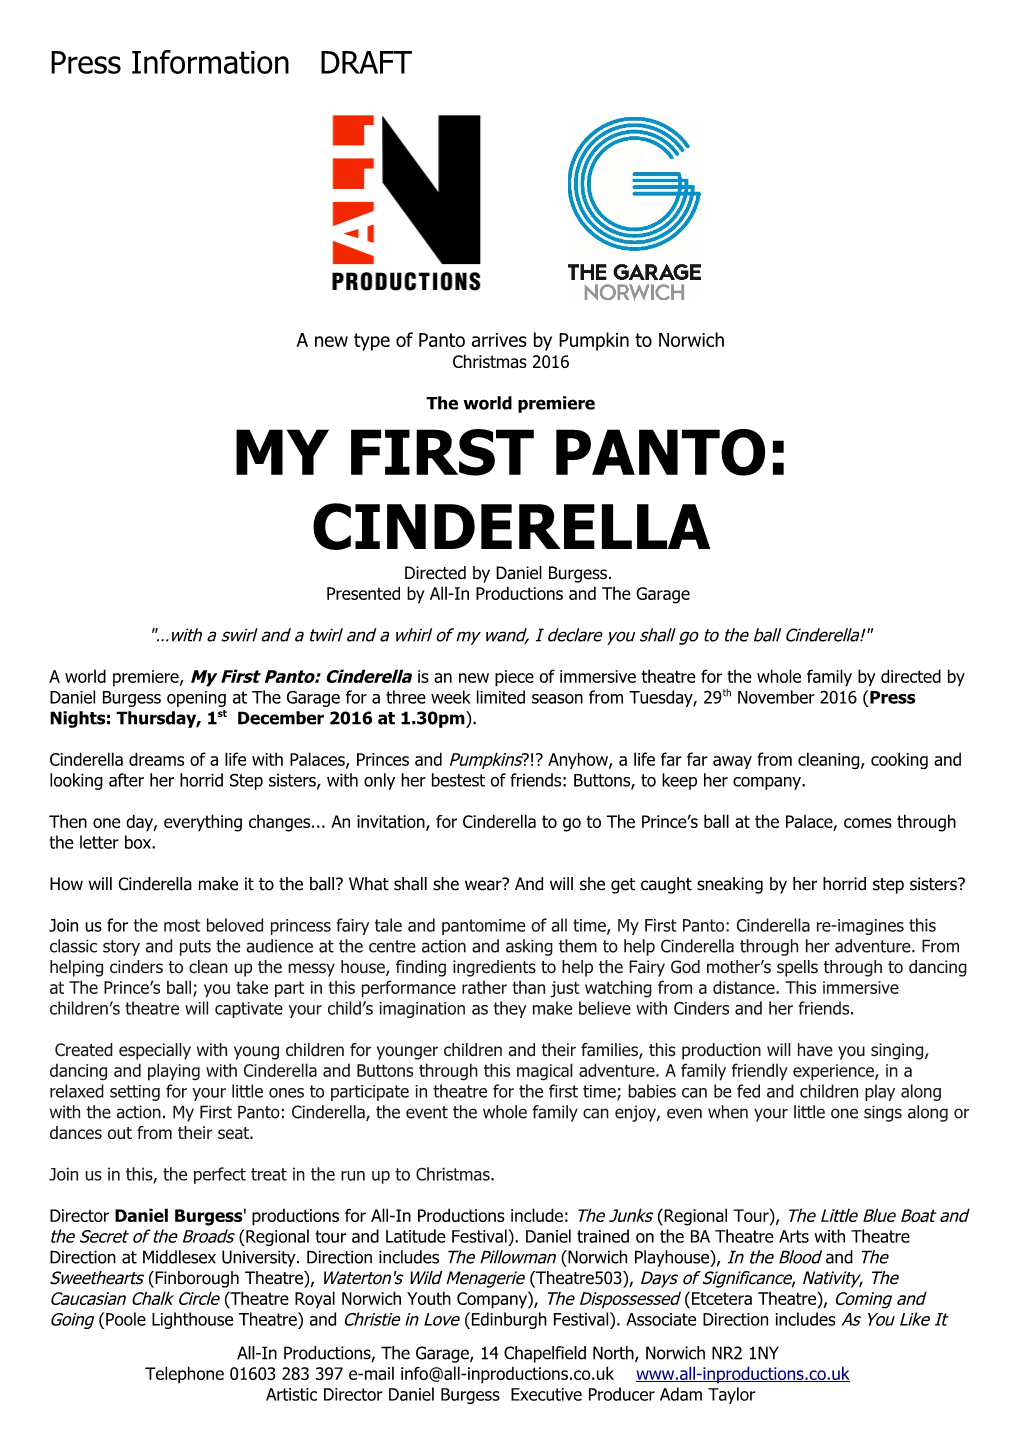 A New Type of Panto Arrives by Pumpkin to Norwich